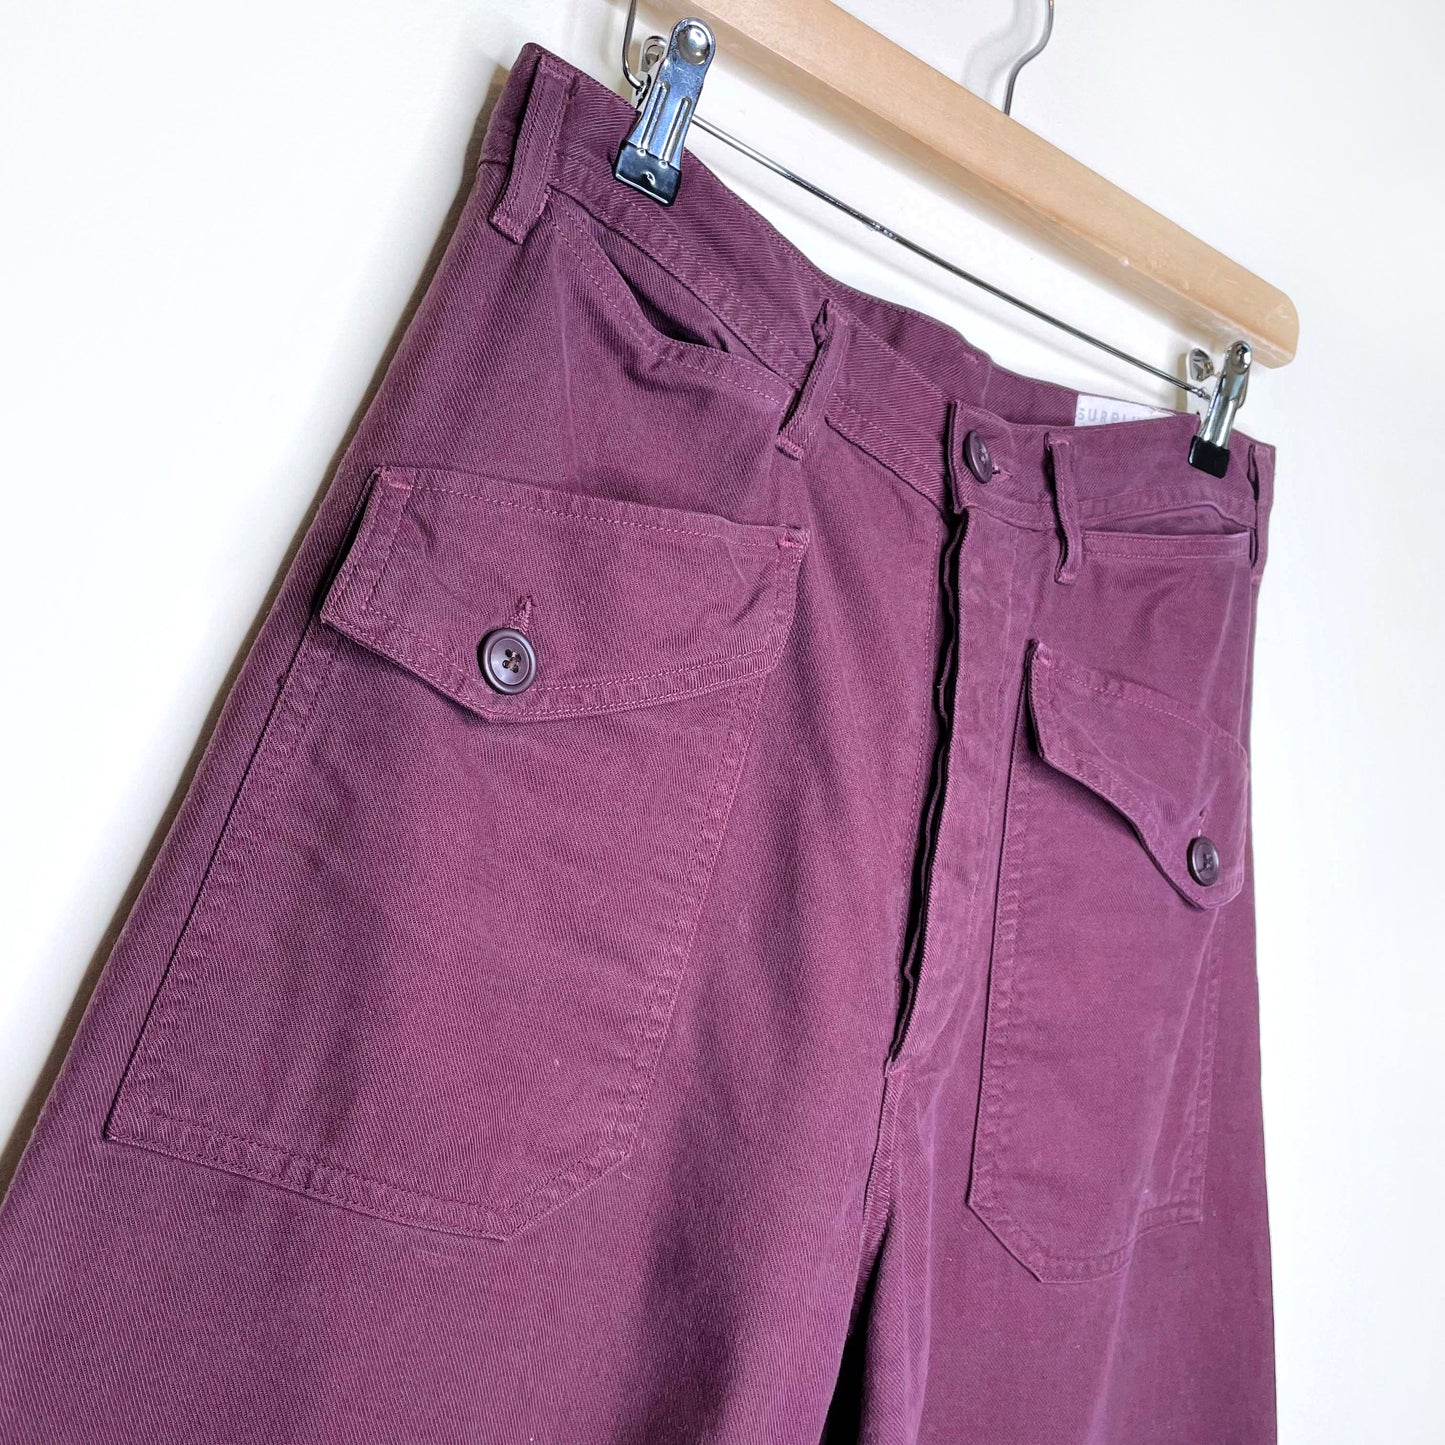 citizens of humanity surplus high rise wide leg cargo pants - size 27